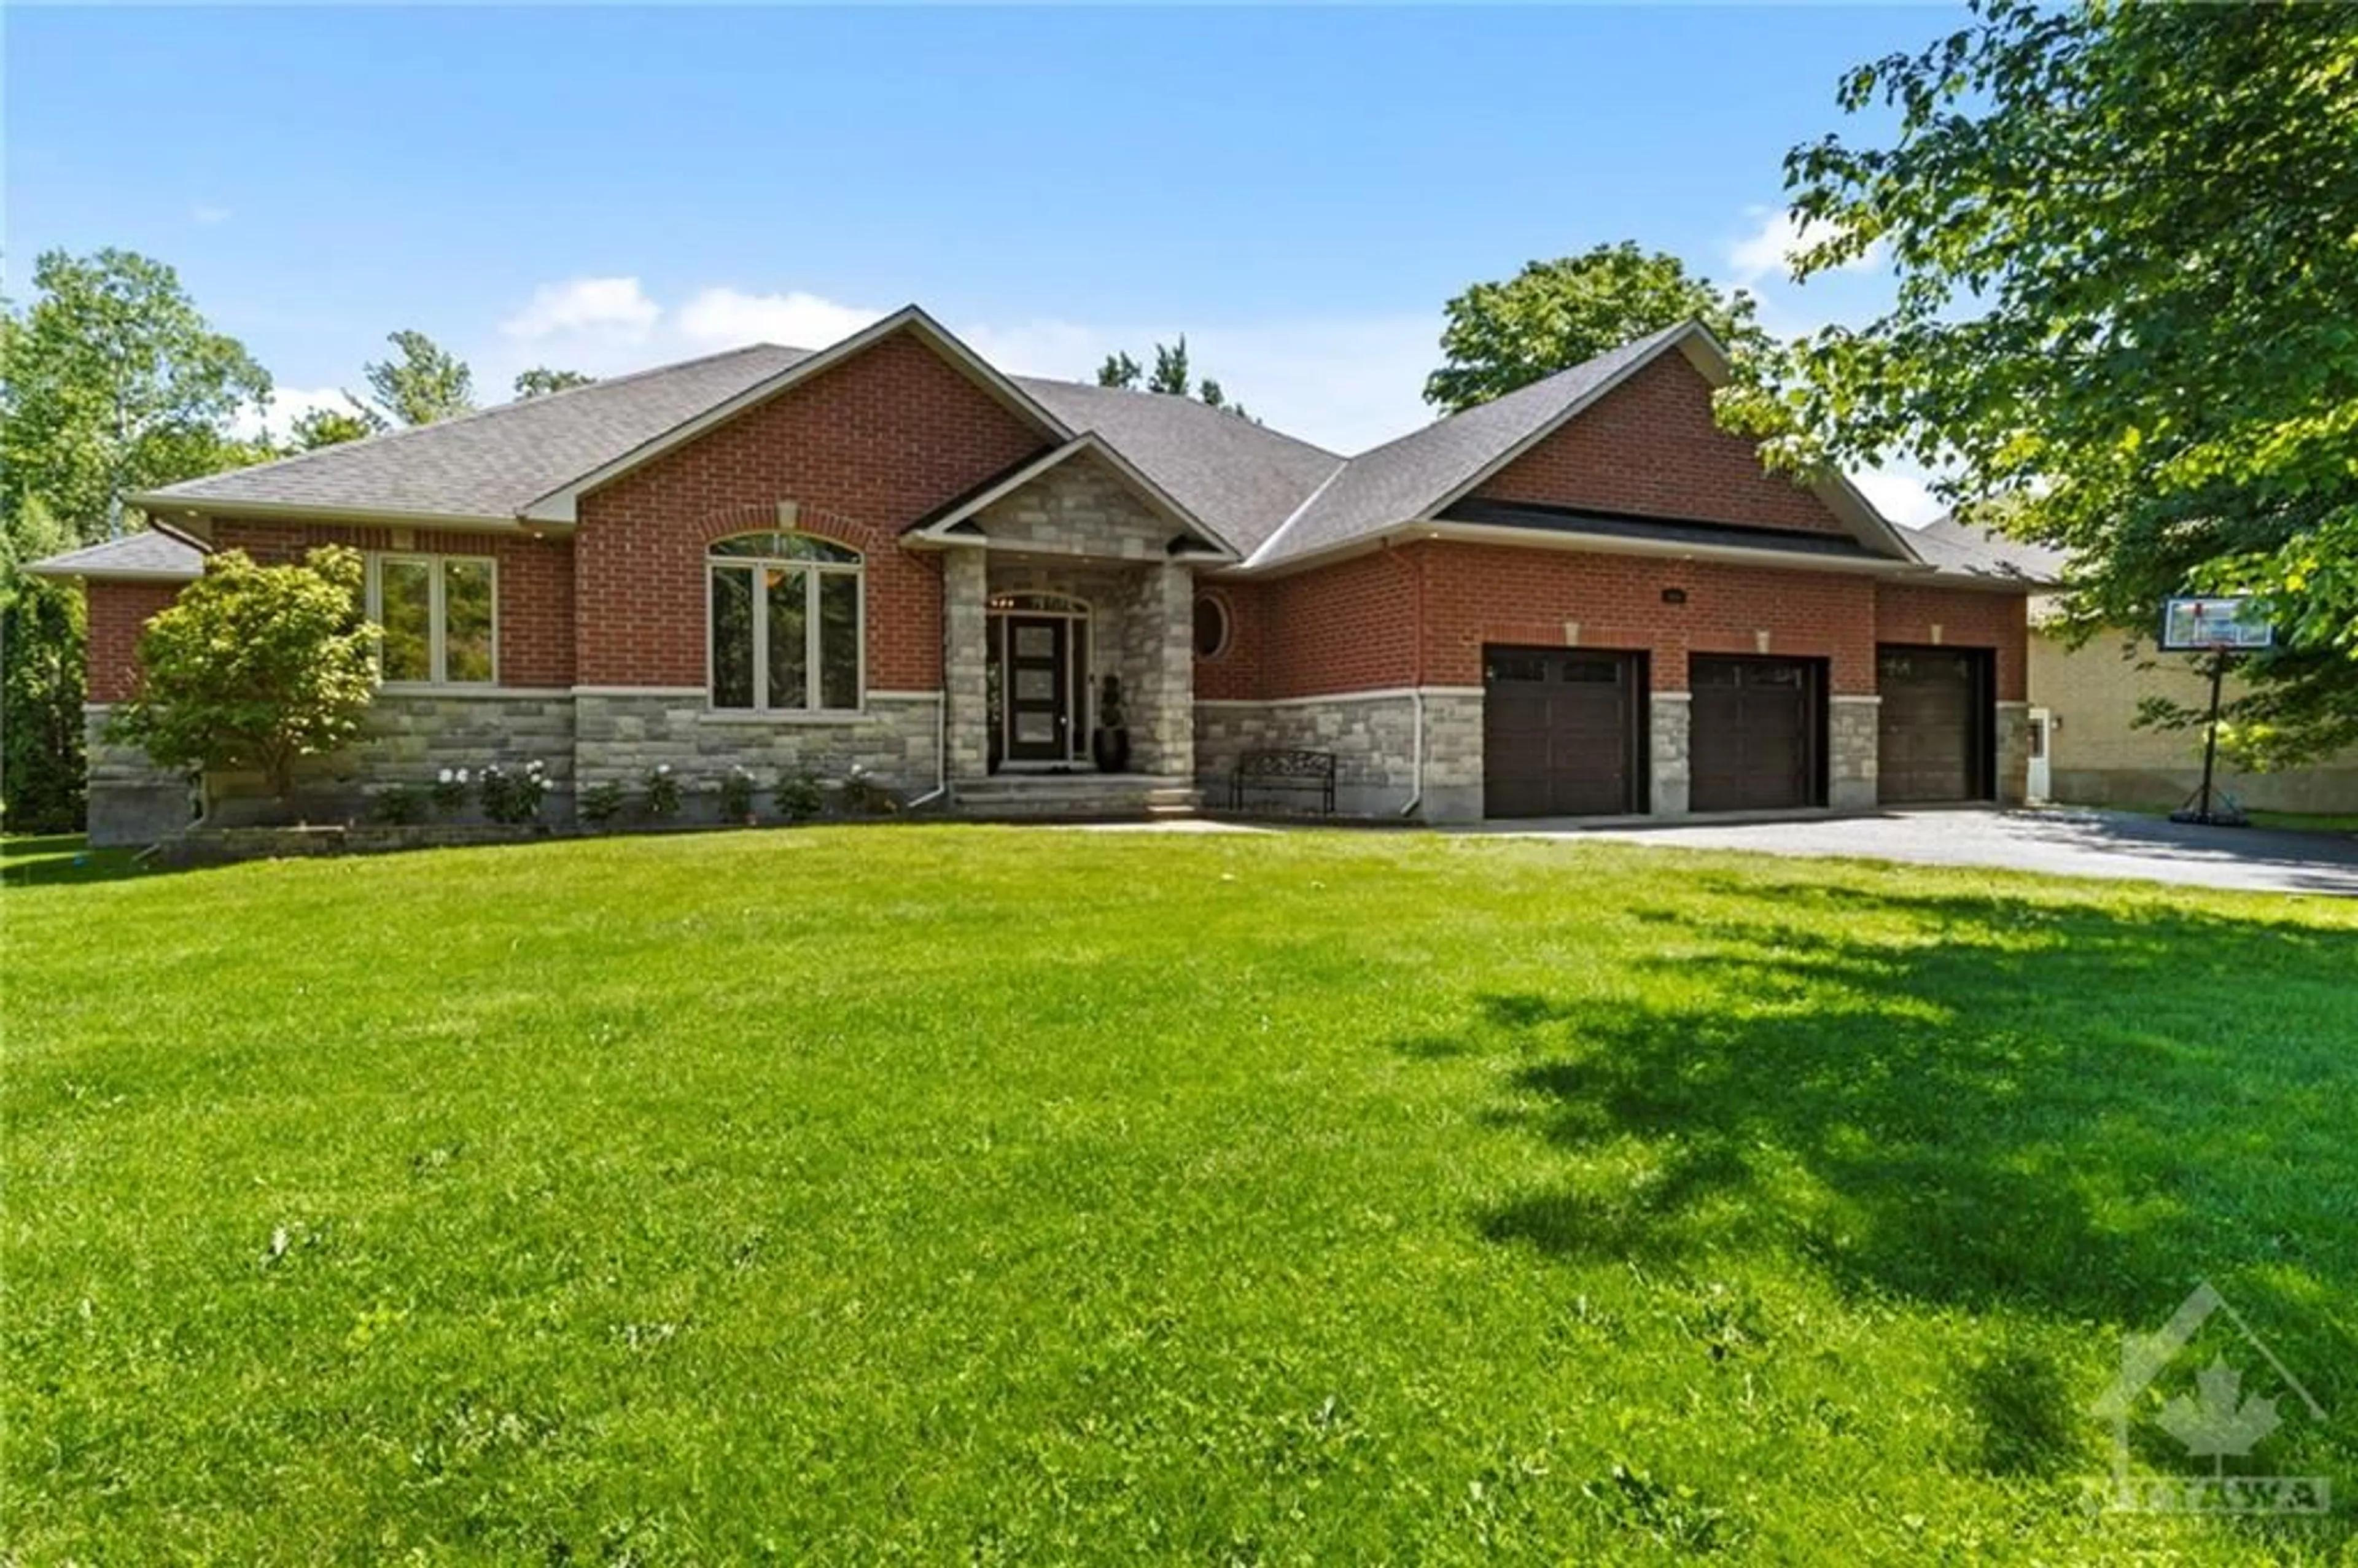 Home with brick exterior material for 6800 PEBBLE TRAIL Way, Ottawa Ontario K4P 0B7